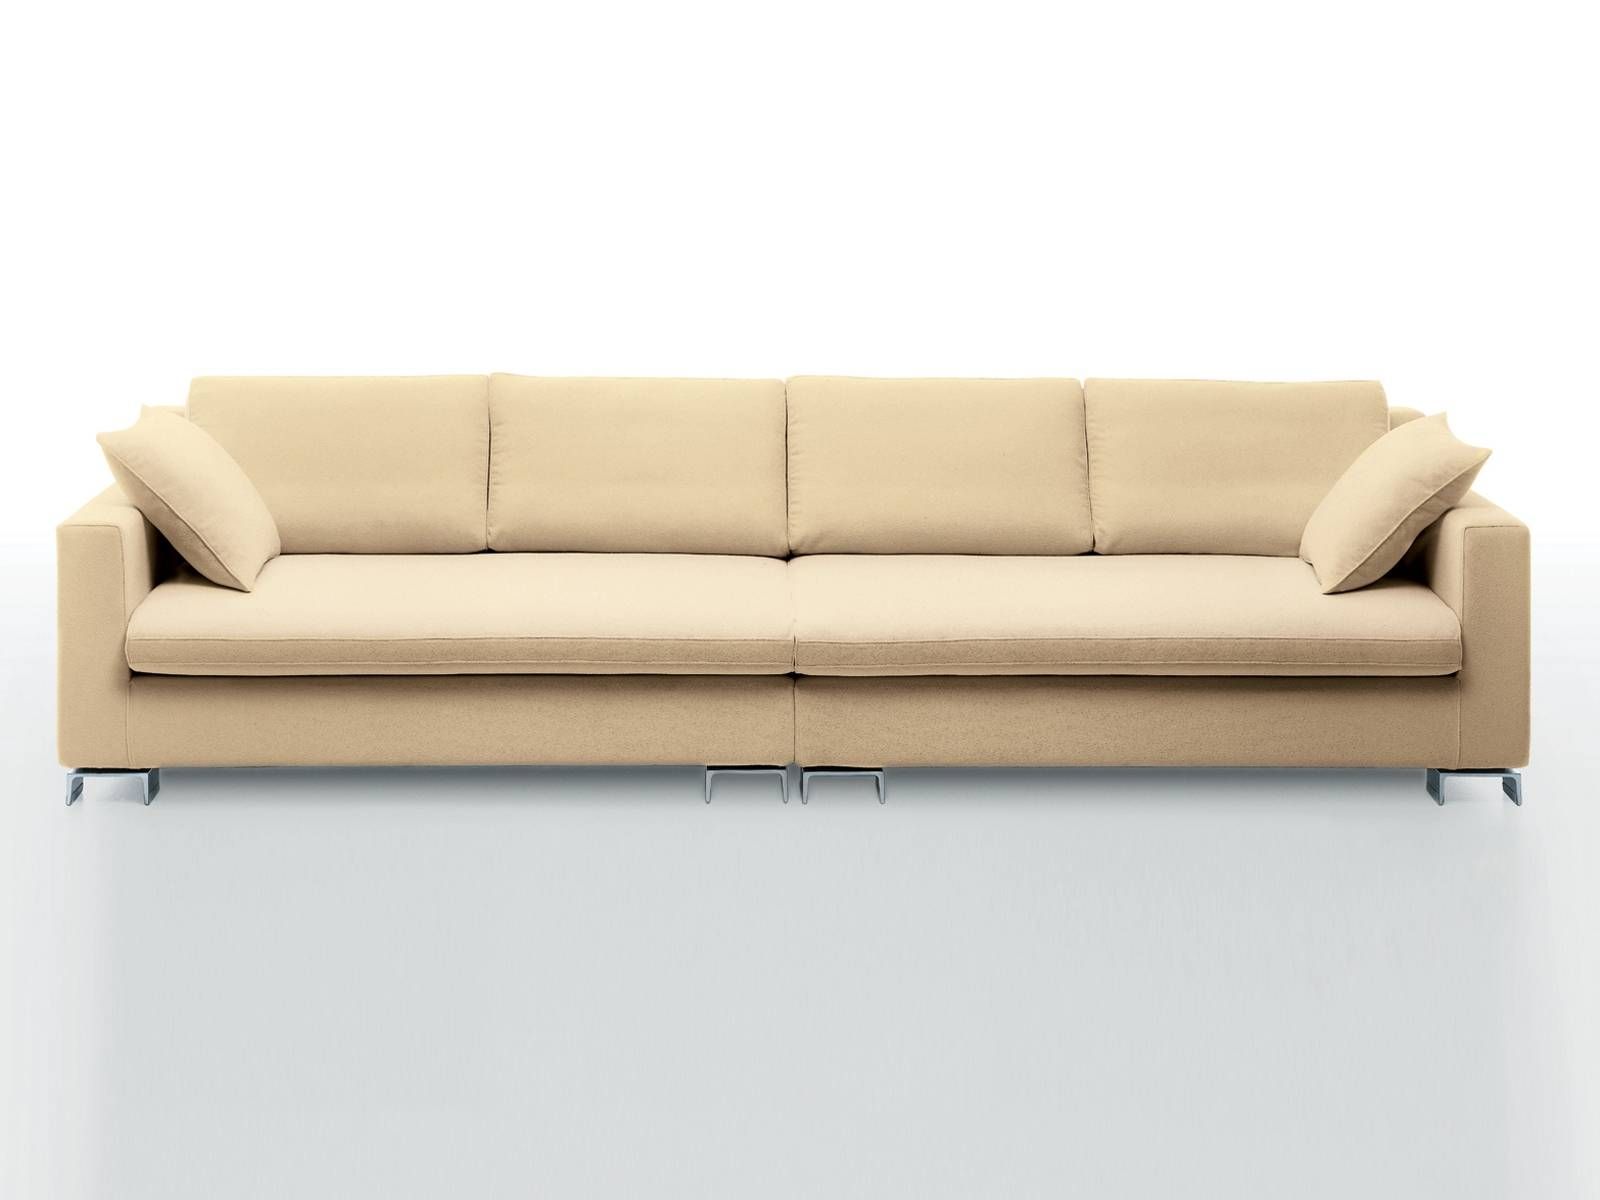 I 4 Mariani Sofas | Archiproducts Pertaining To 4 Seater Sofas (View 8 of 30)